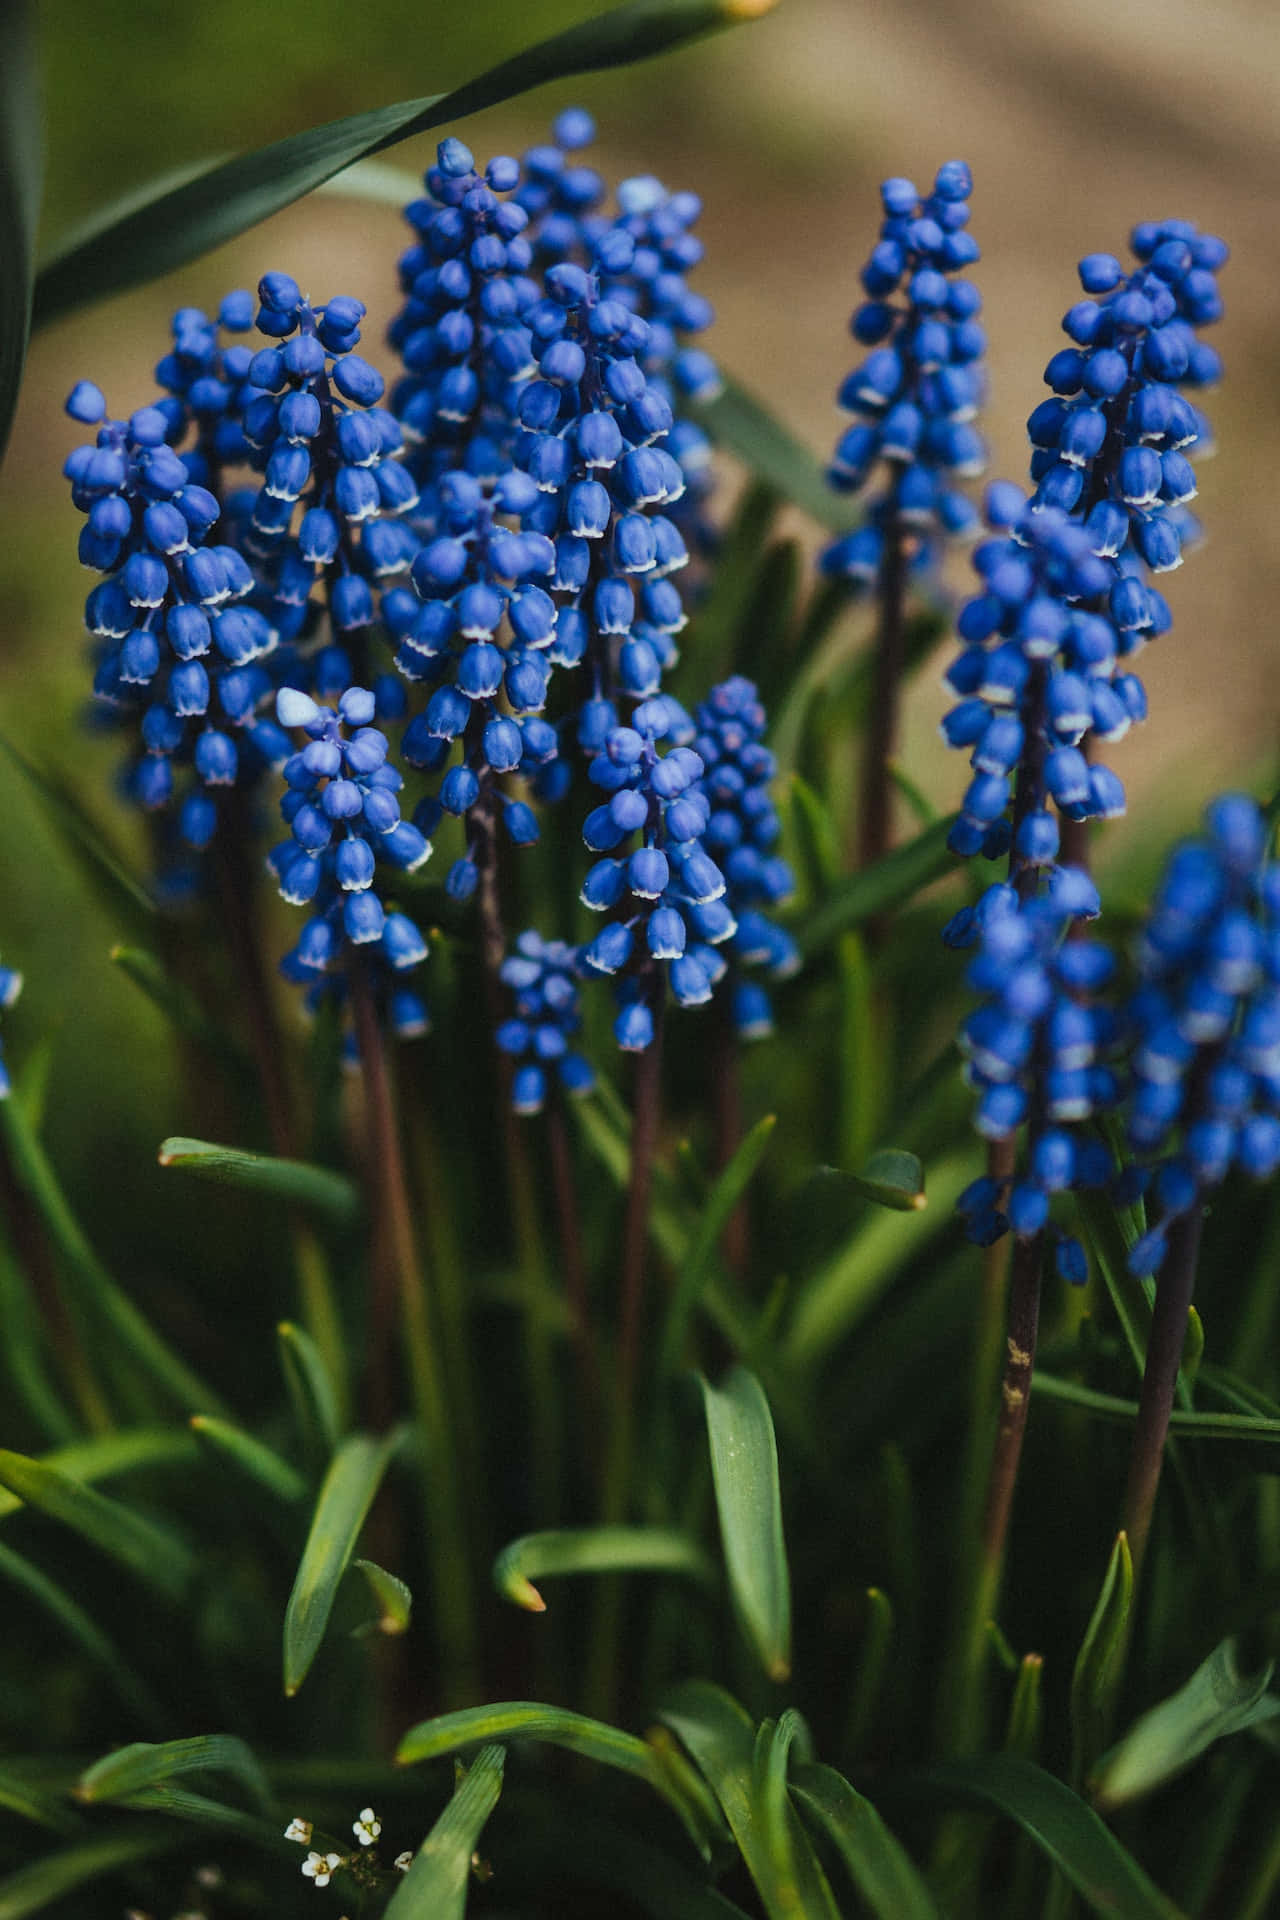 Stunning Display of Grape Hyacinths - Blue Flowers For Your Phone Wallpaper